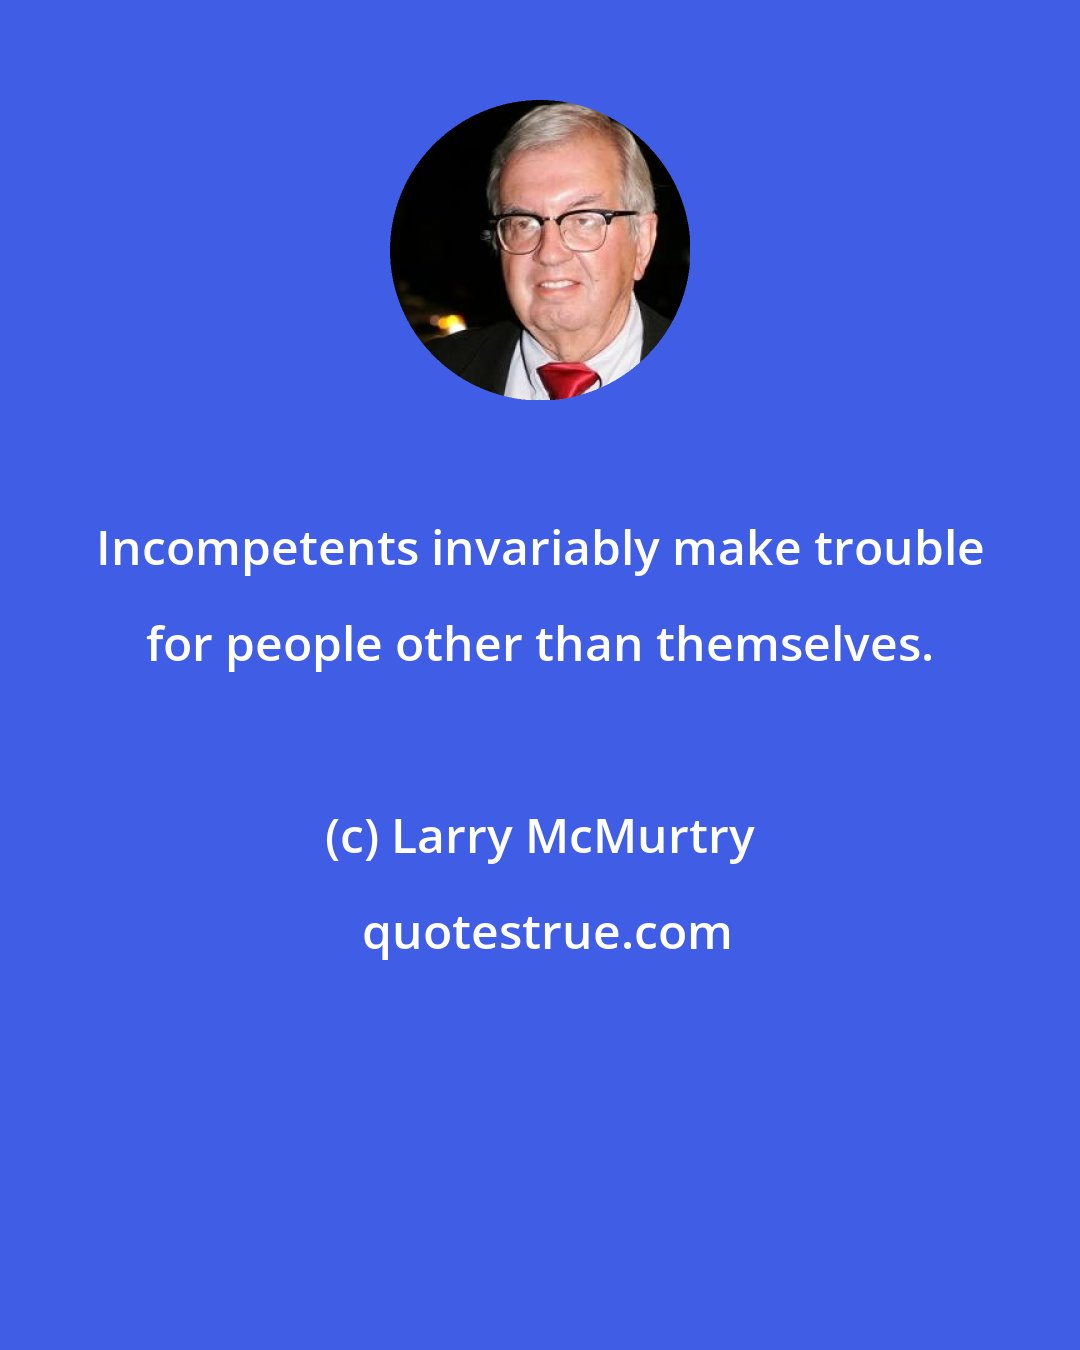 Larry McMurtry: Incompetents invariably make trouble for people other than themselves.